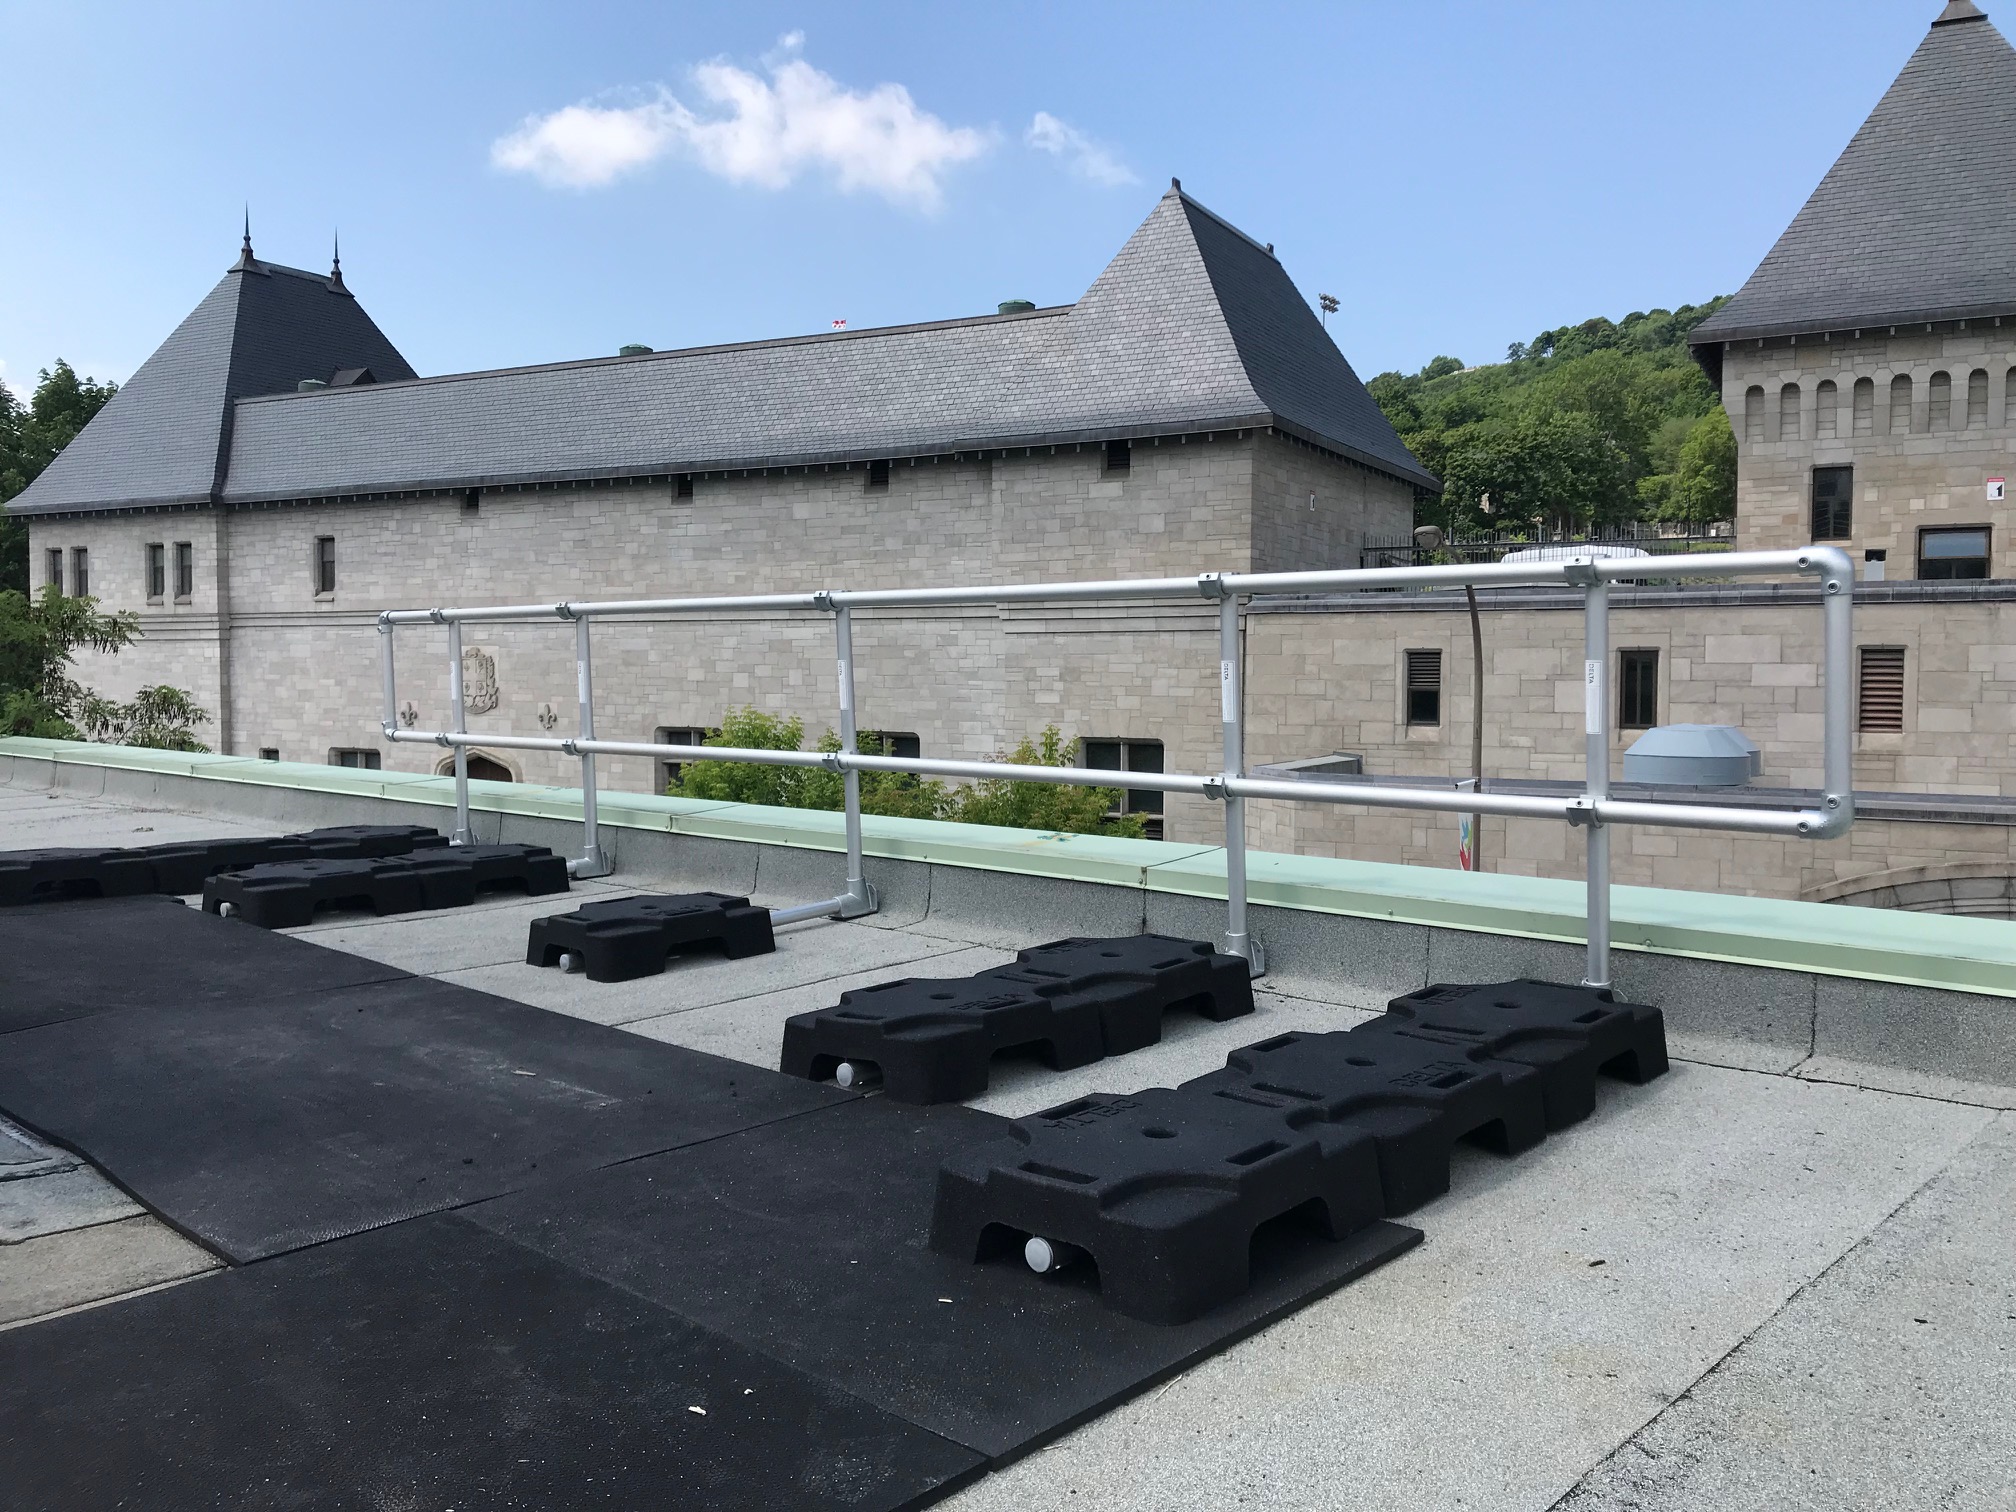 A reliable and durable protection for McGill University